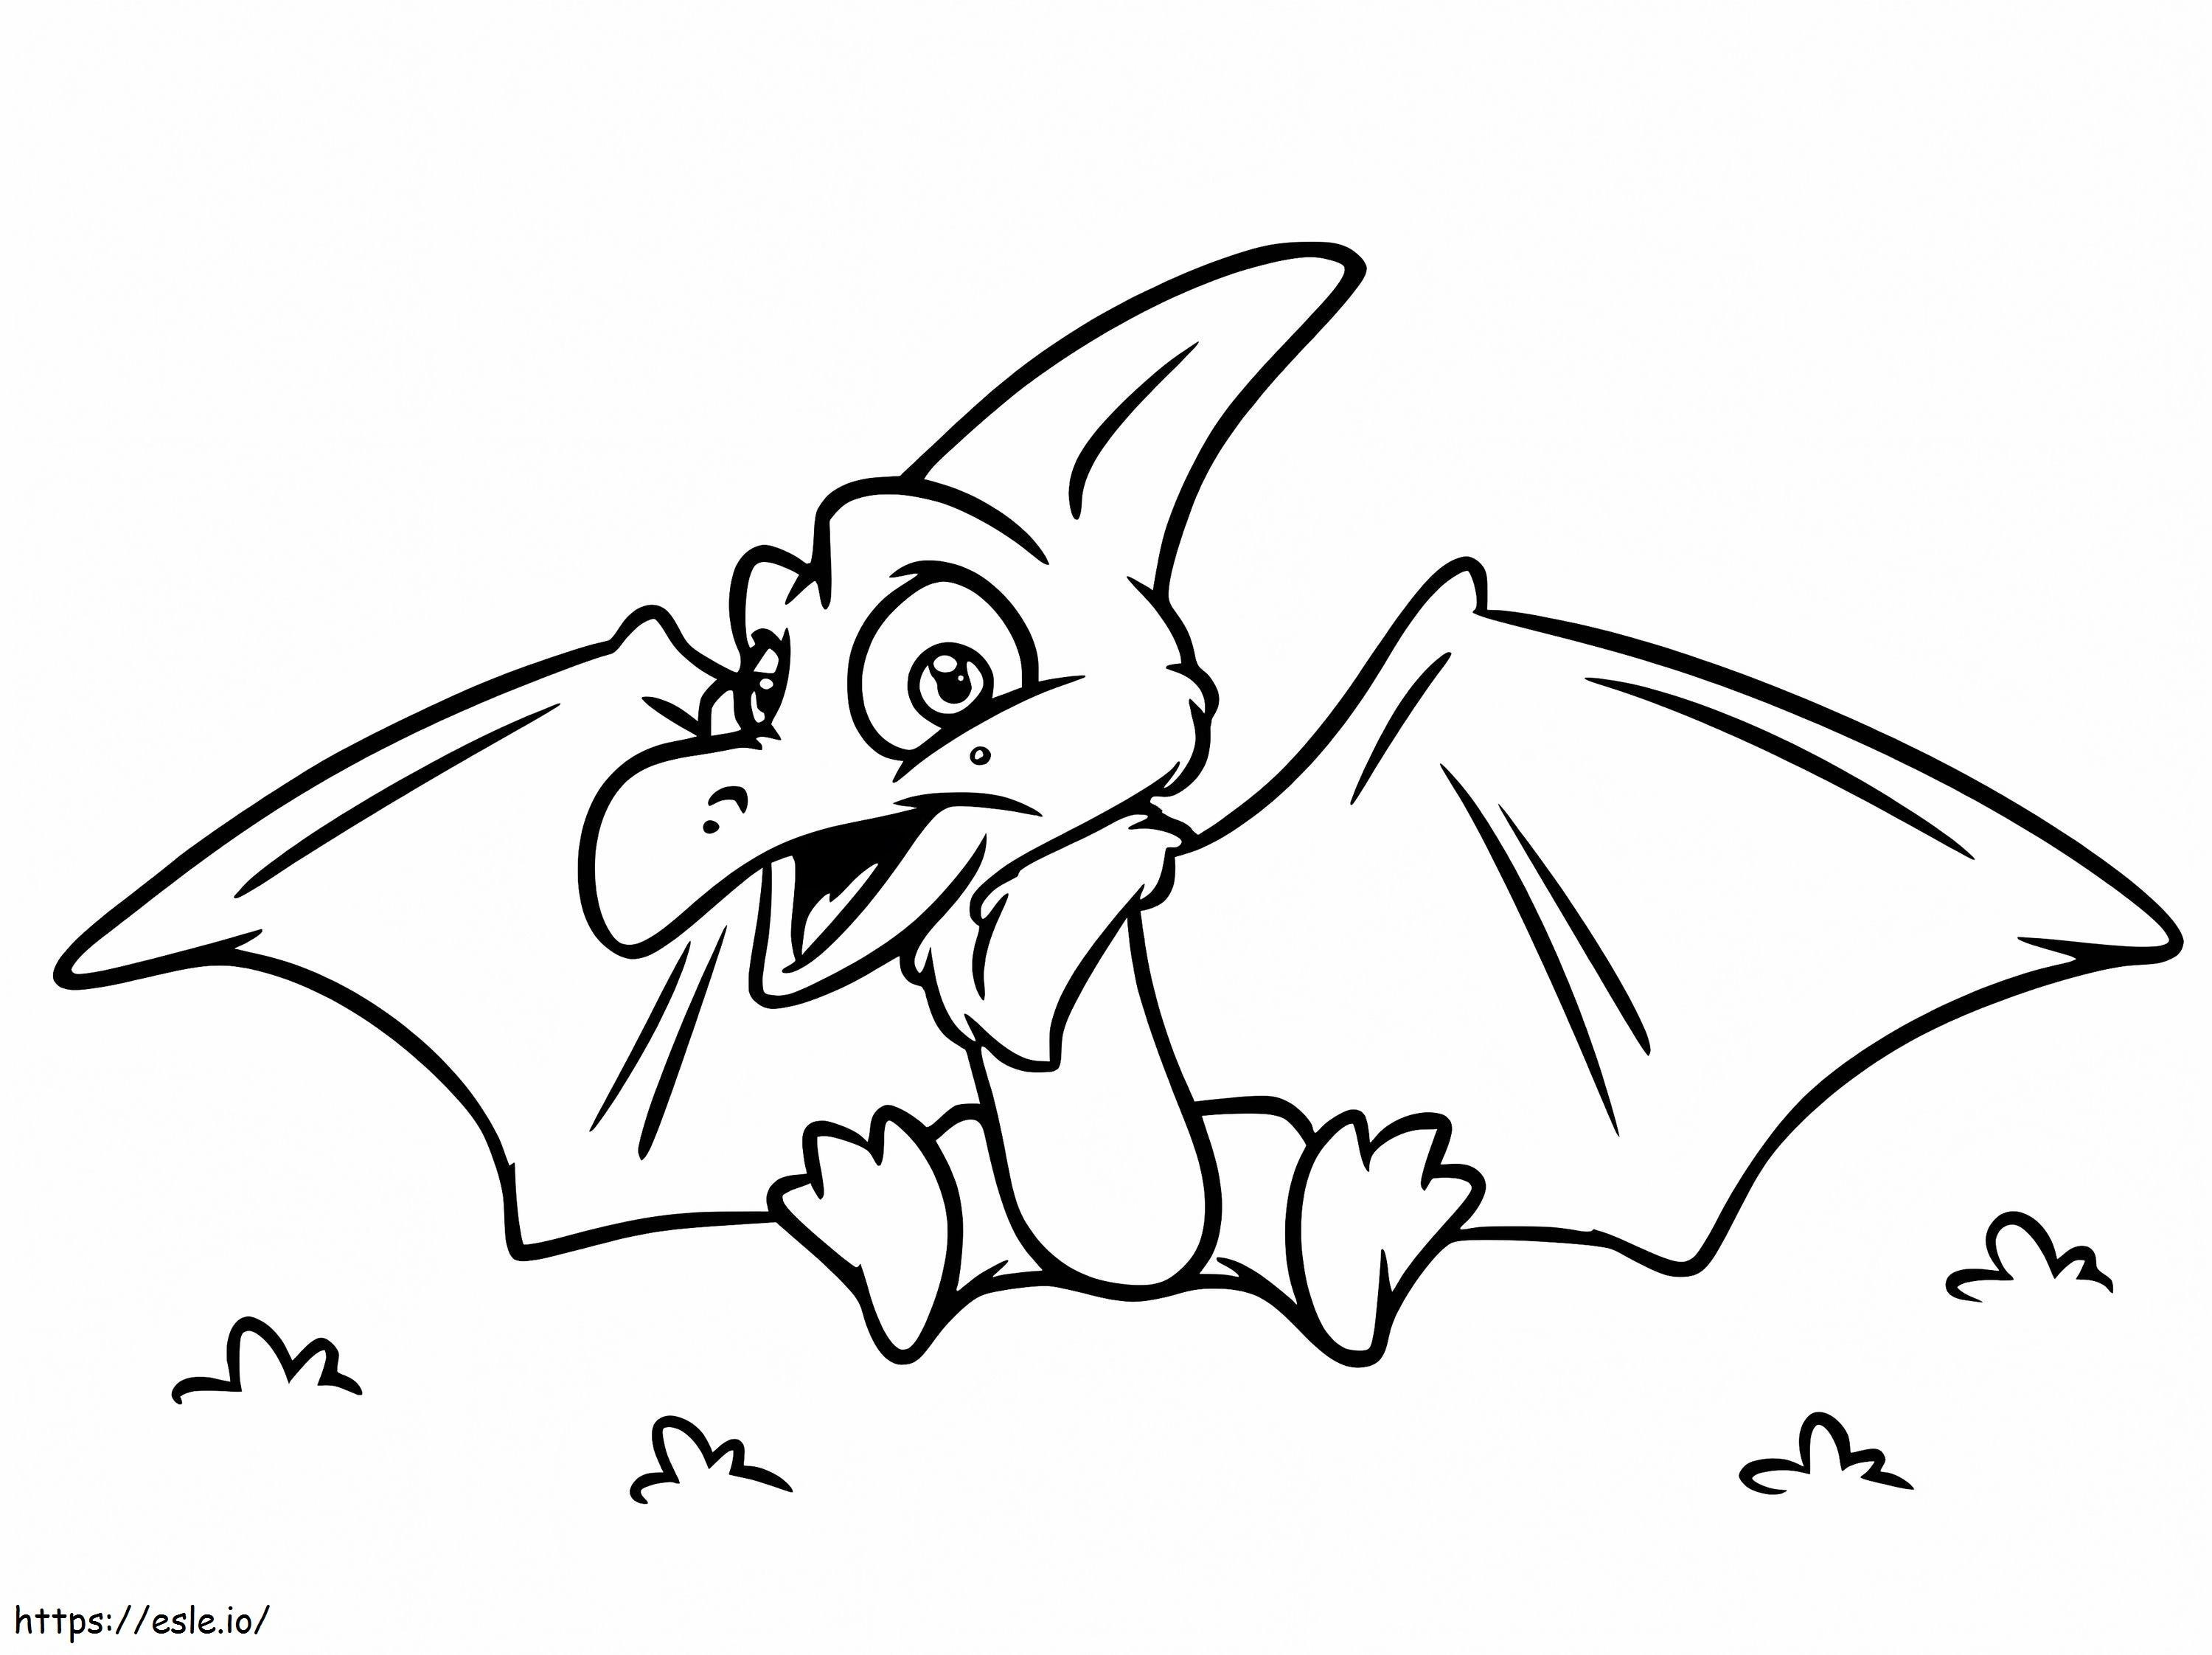 Easy Flying Dinosaur coloring page